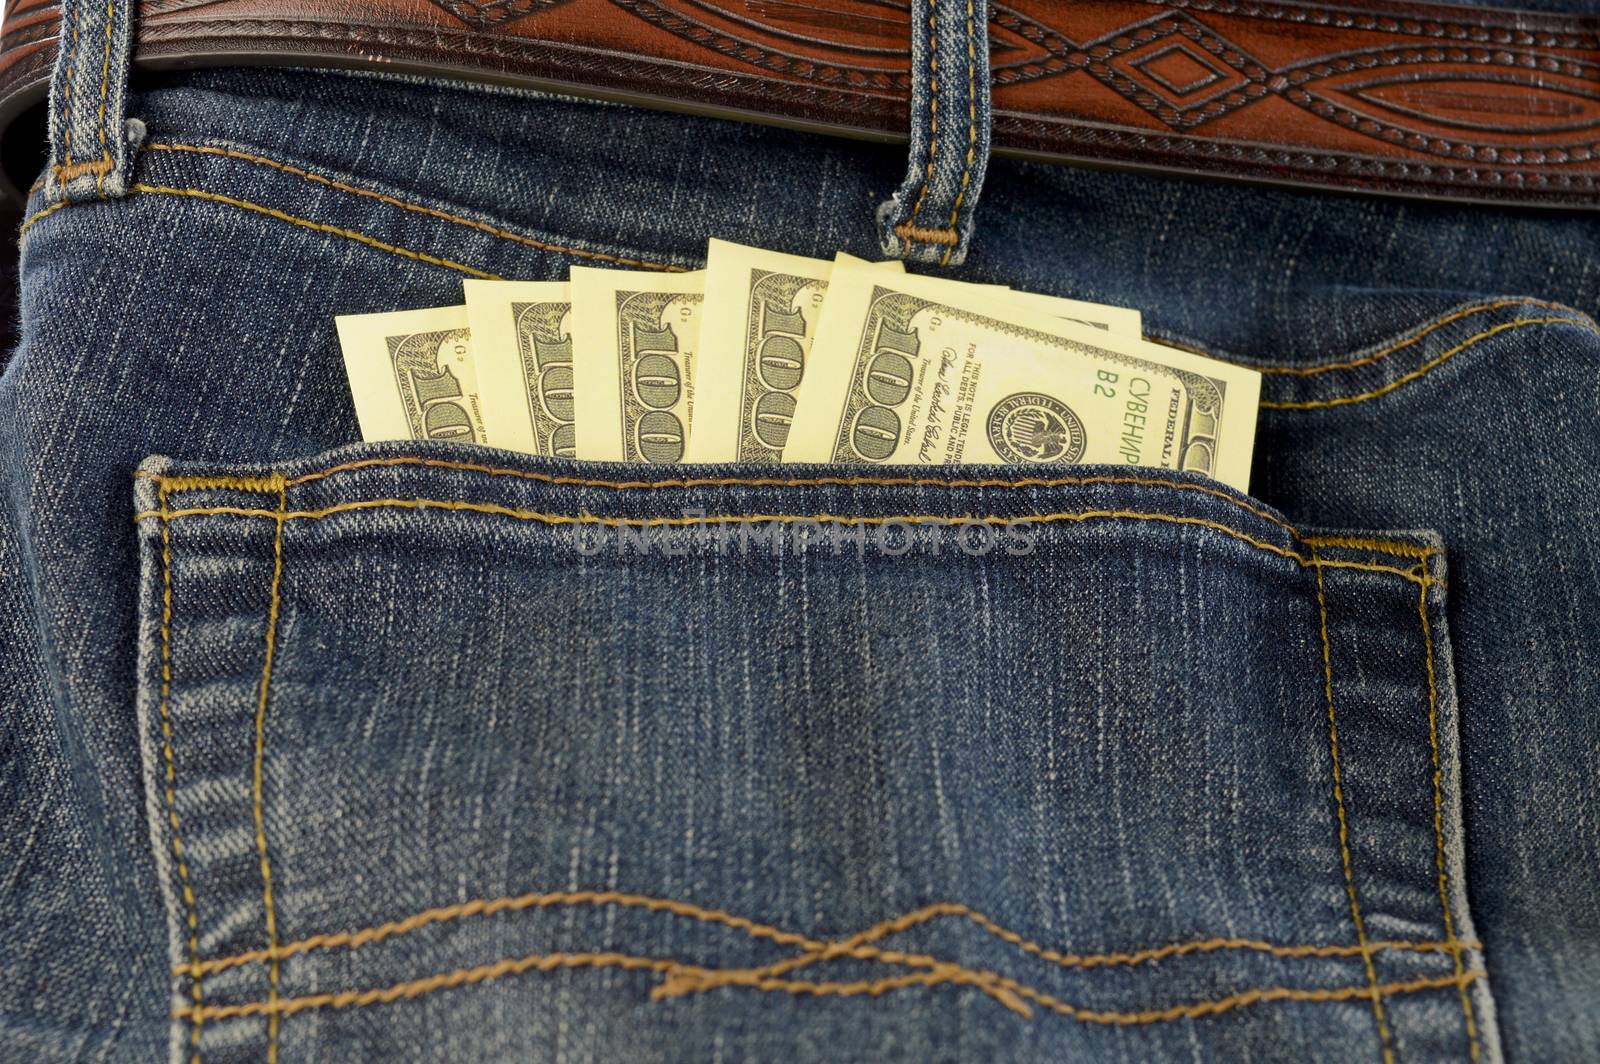 A back pocket of jeans with some American cash money emerging to show whats inside.